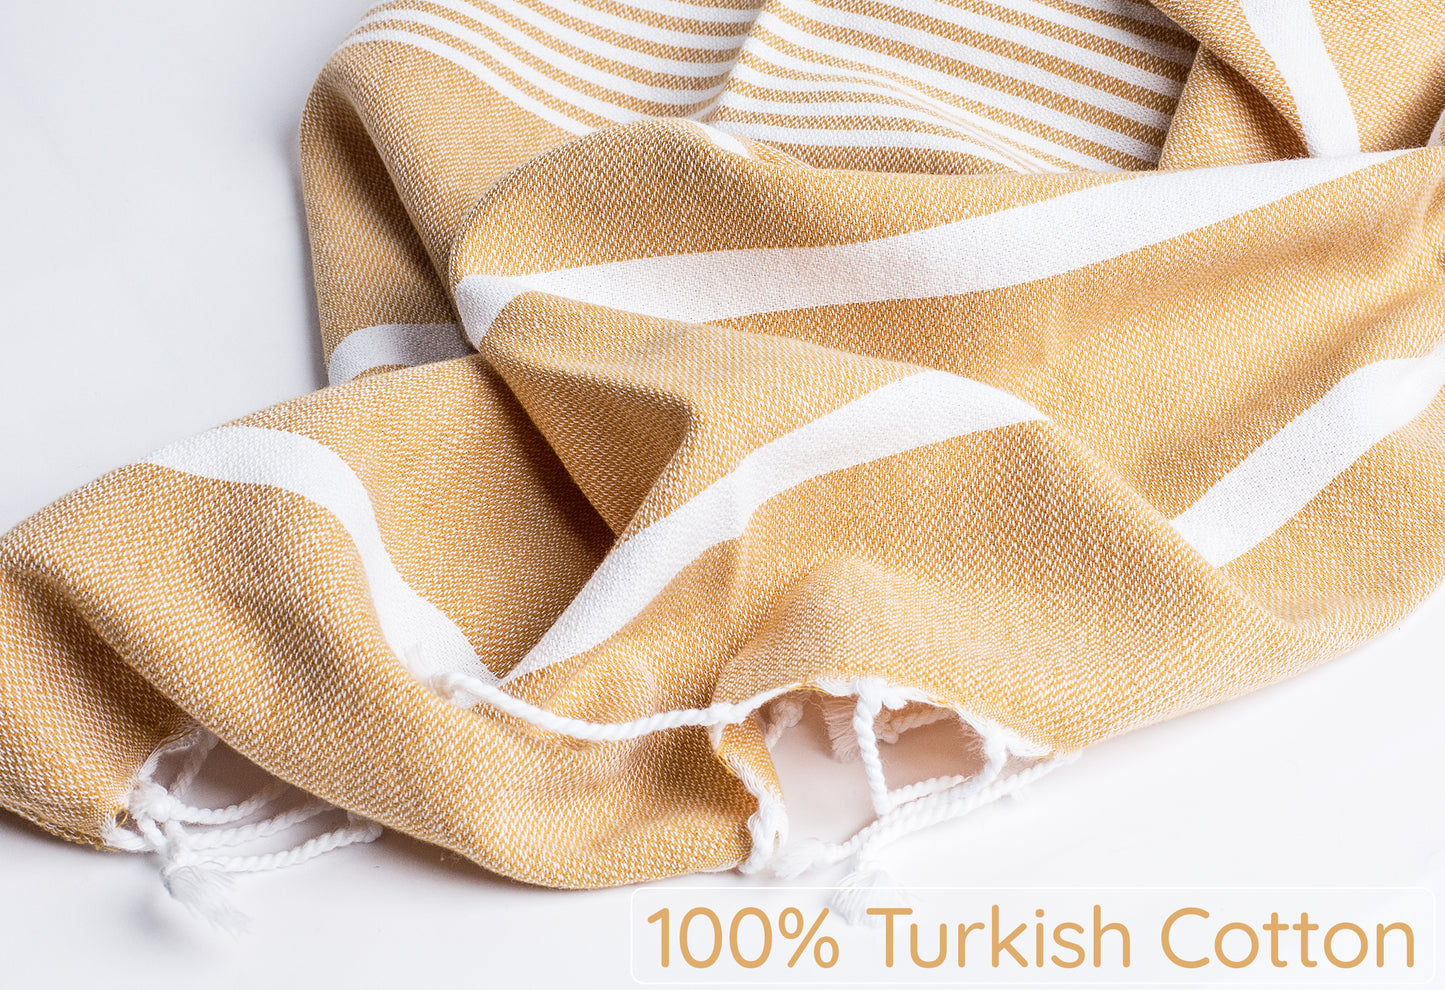 Orange Turkish Beach Towels (35”x67”)  Lightweight, Quick drying and Sand Free Can be Used as Beach Blanket 100% Cotton